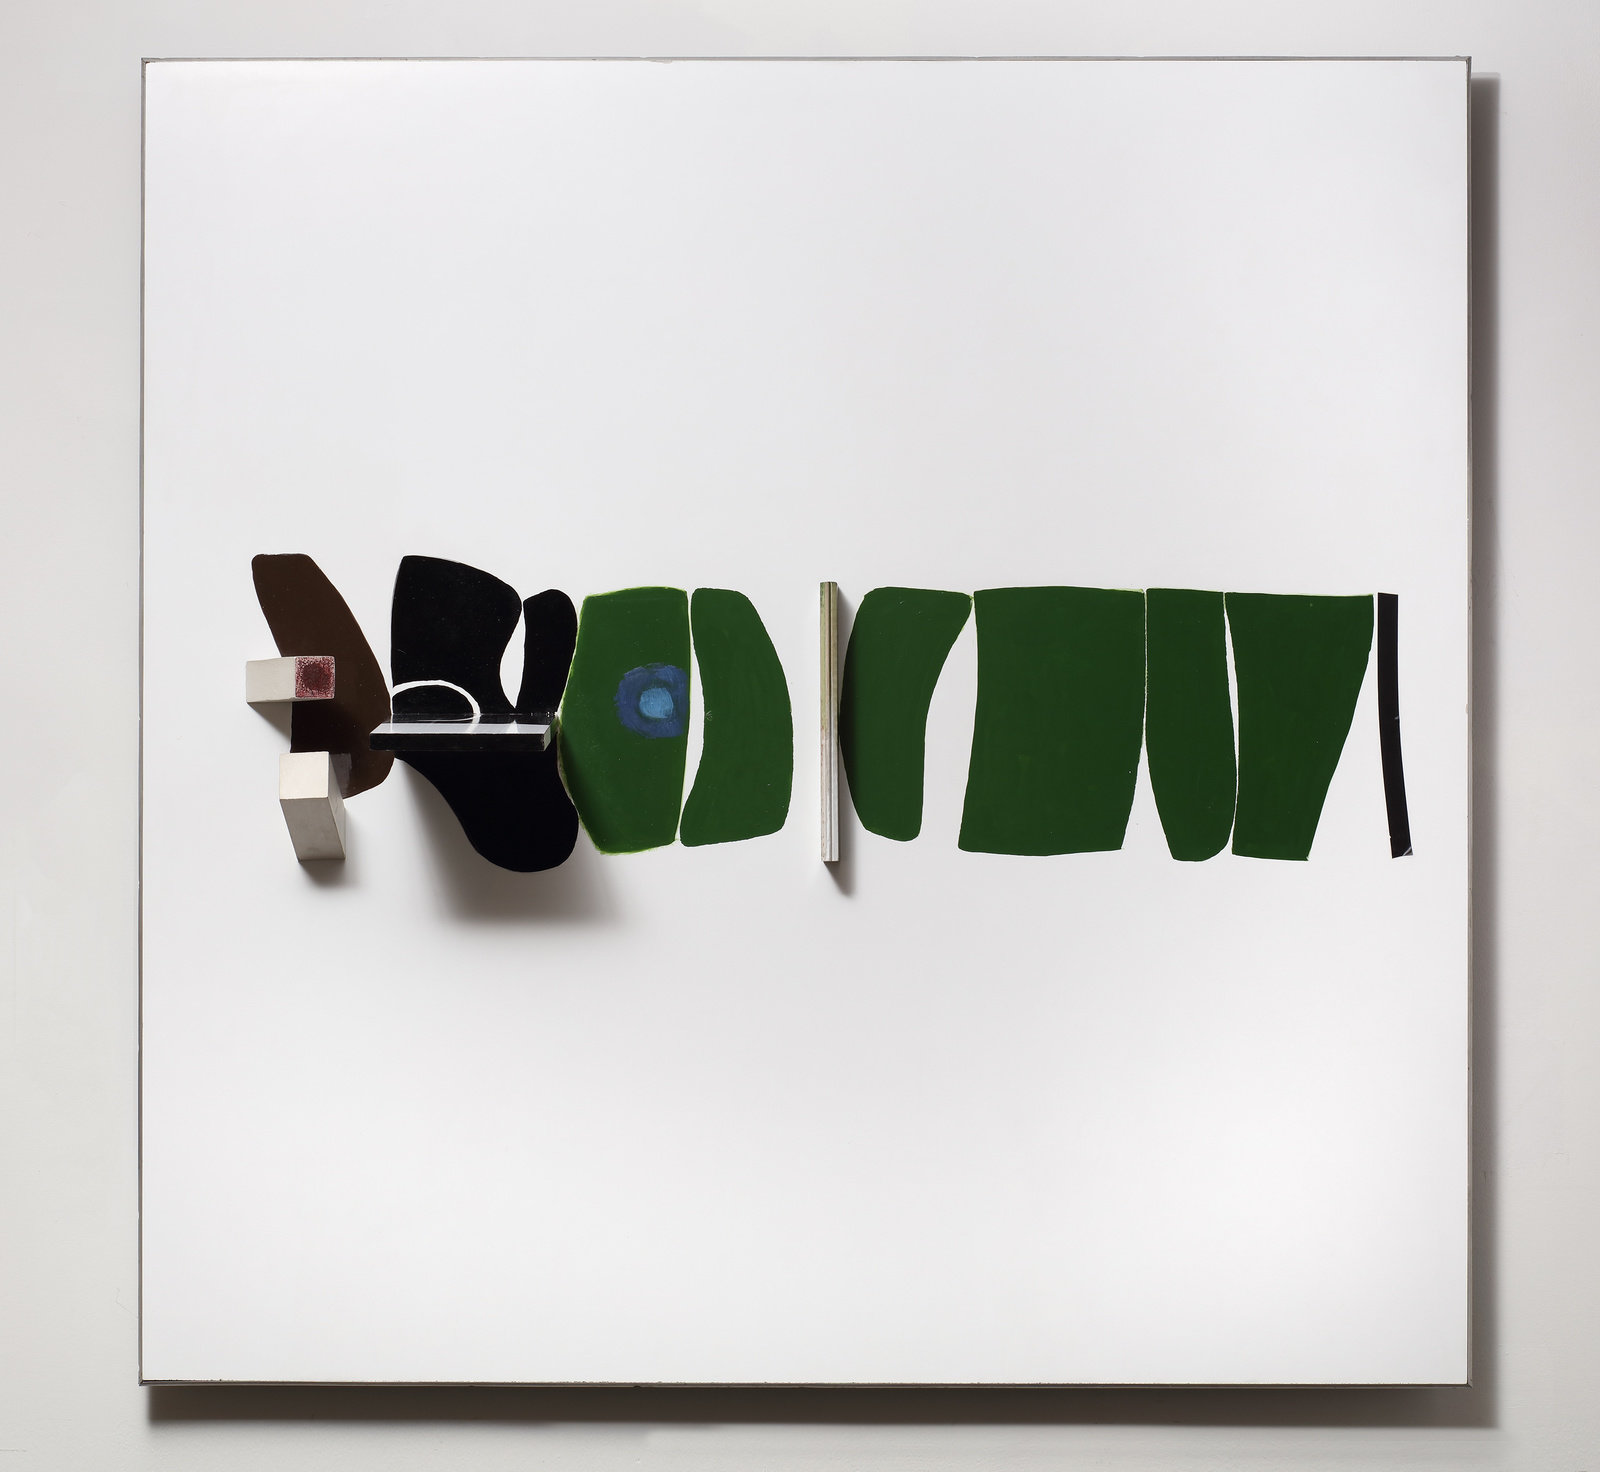 Pasmore, points of contact, green development, 1966, oil on plastic and wood, 48 3 8 x 48 3 8 x 10 3 4 in., 123 x 123 x 27.5 cm, 314120 (1)